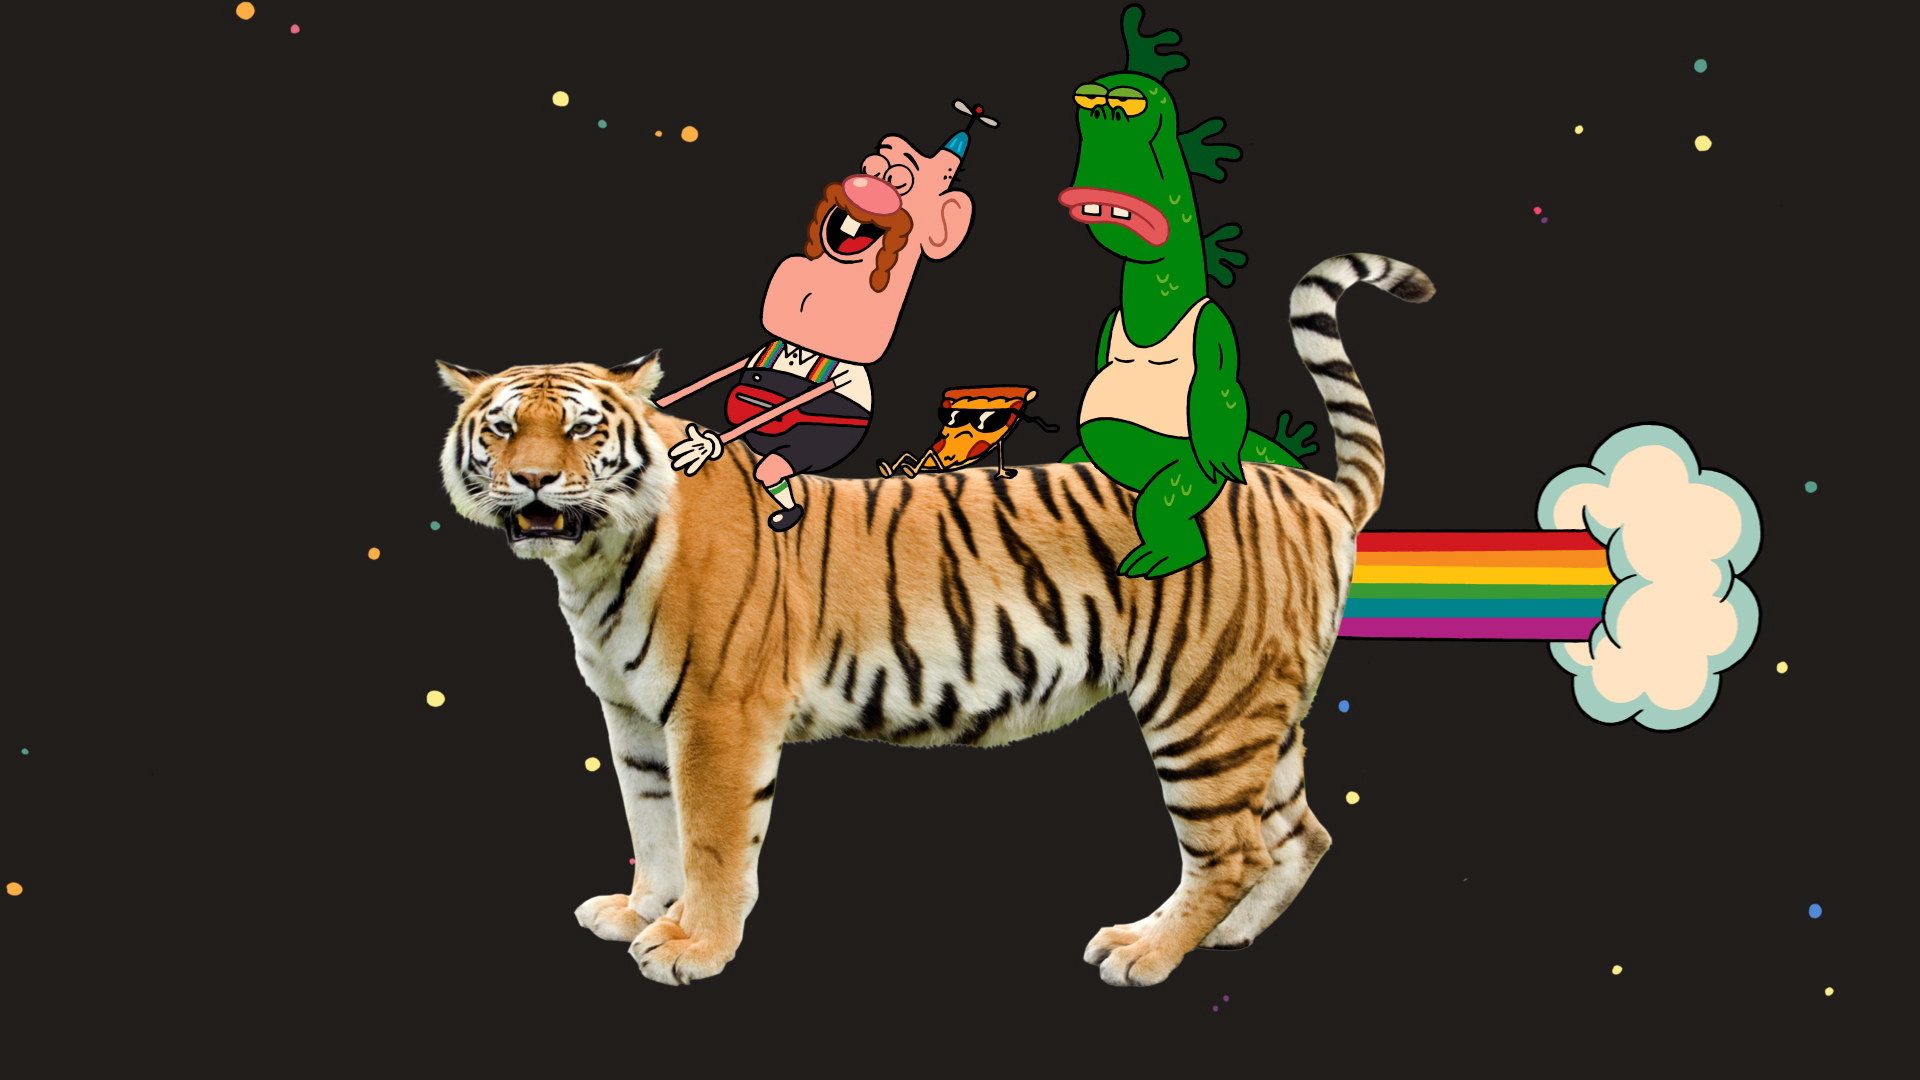 Uncle Grandpa sits on Giant Realistic Flying Tiger with Mr. Gus and Pizza Steve